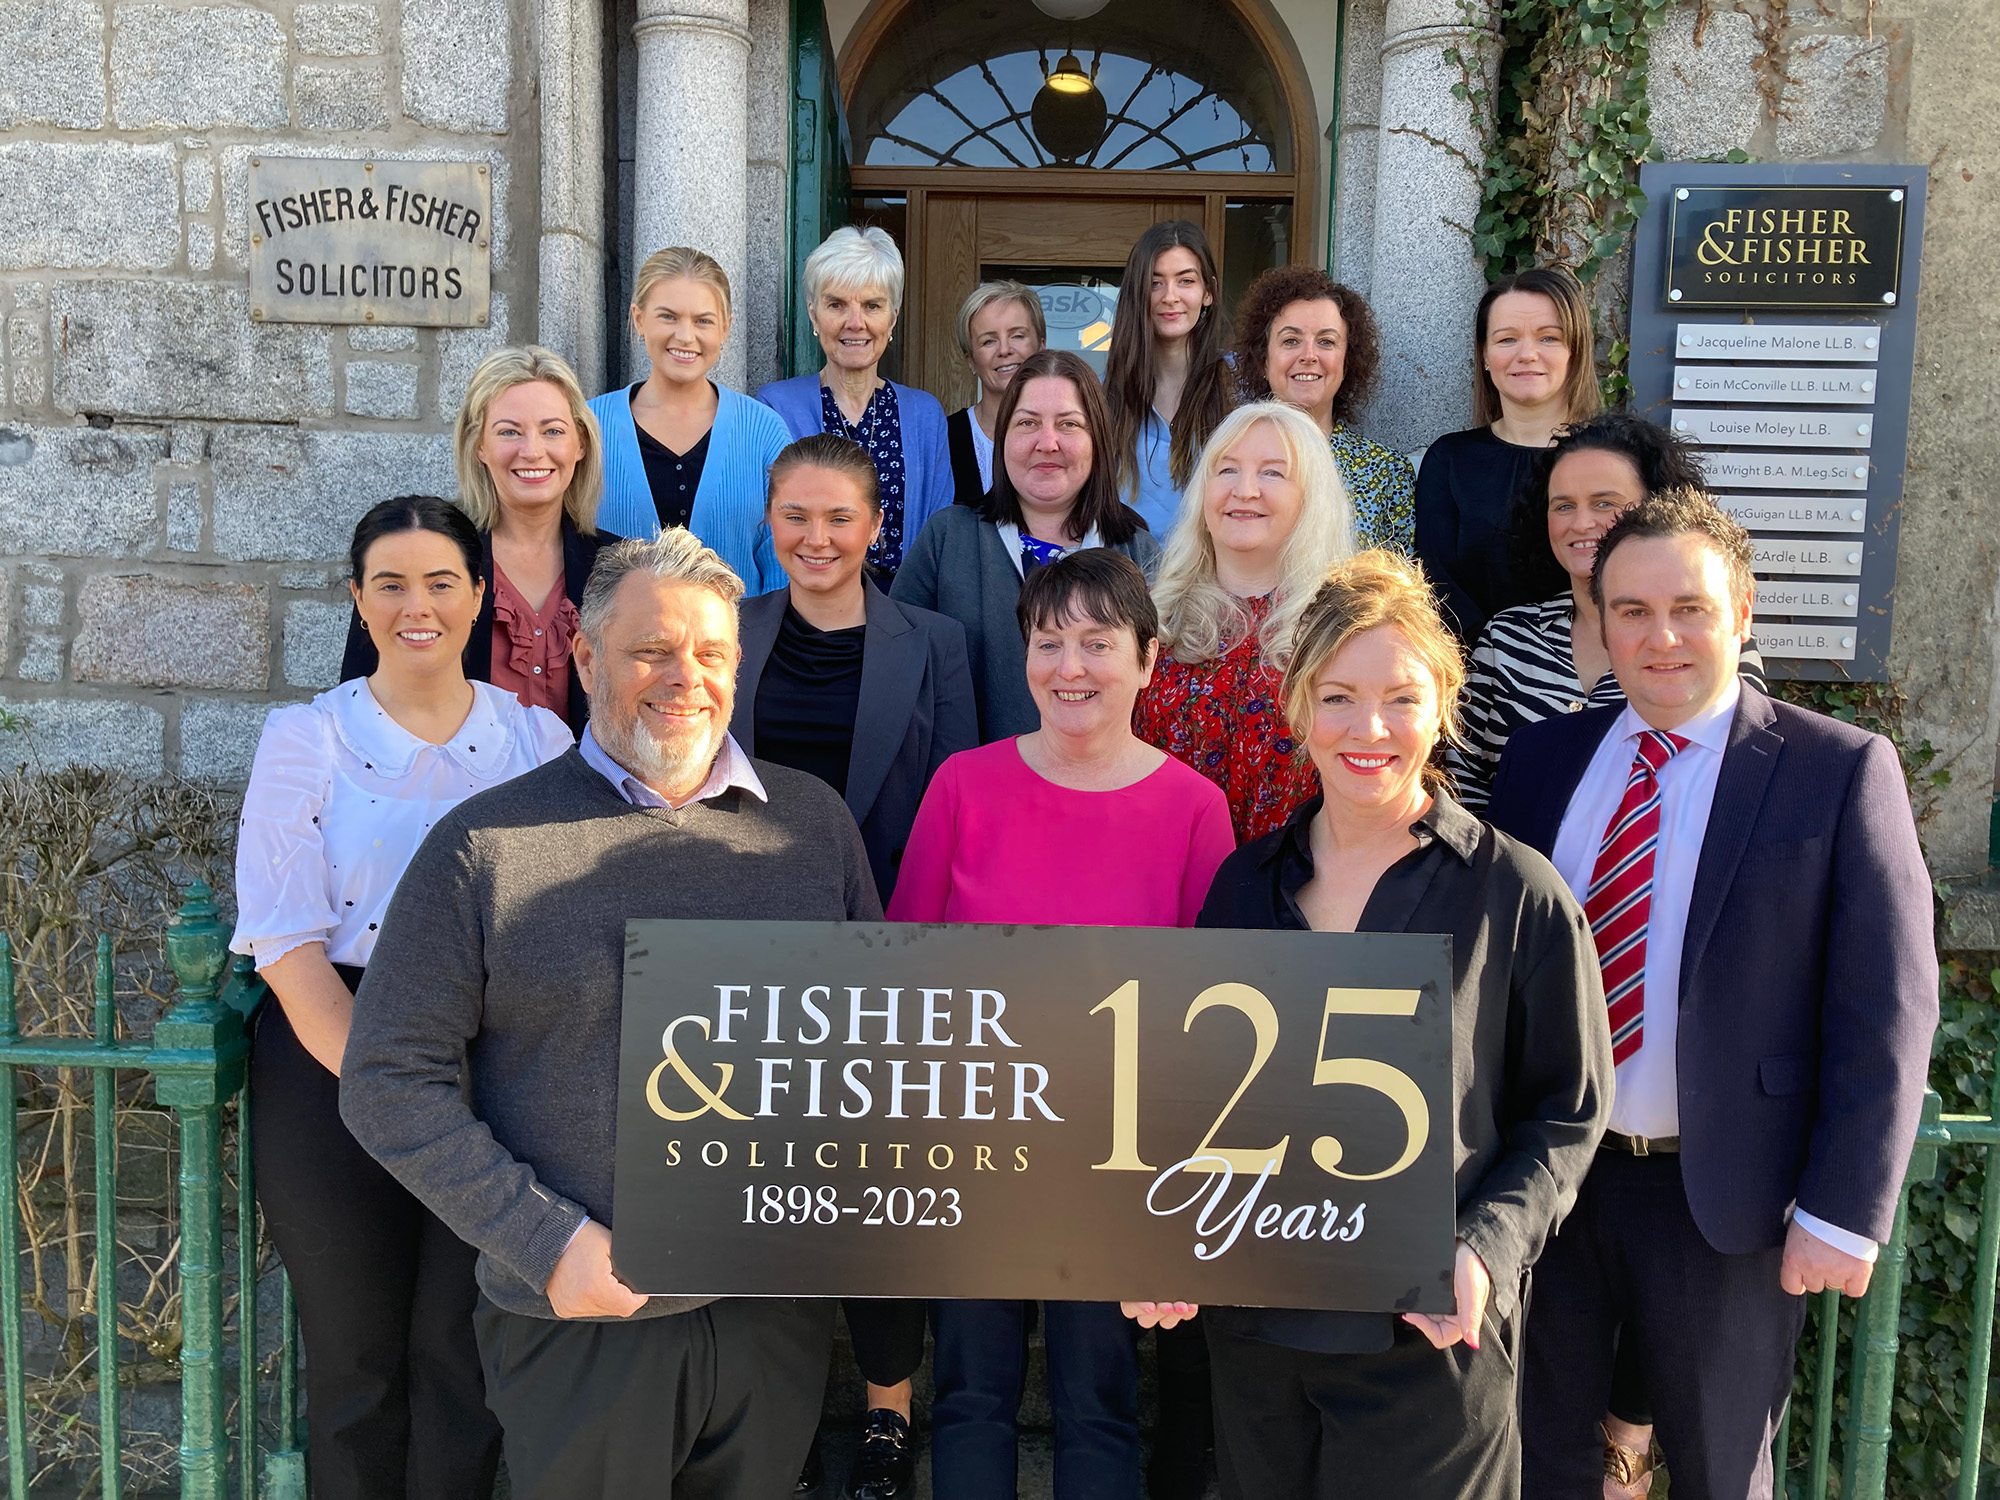 Fisher & Fisher celebrates 125 years in business